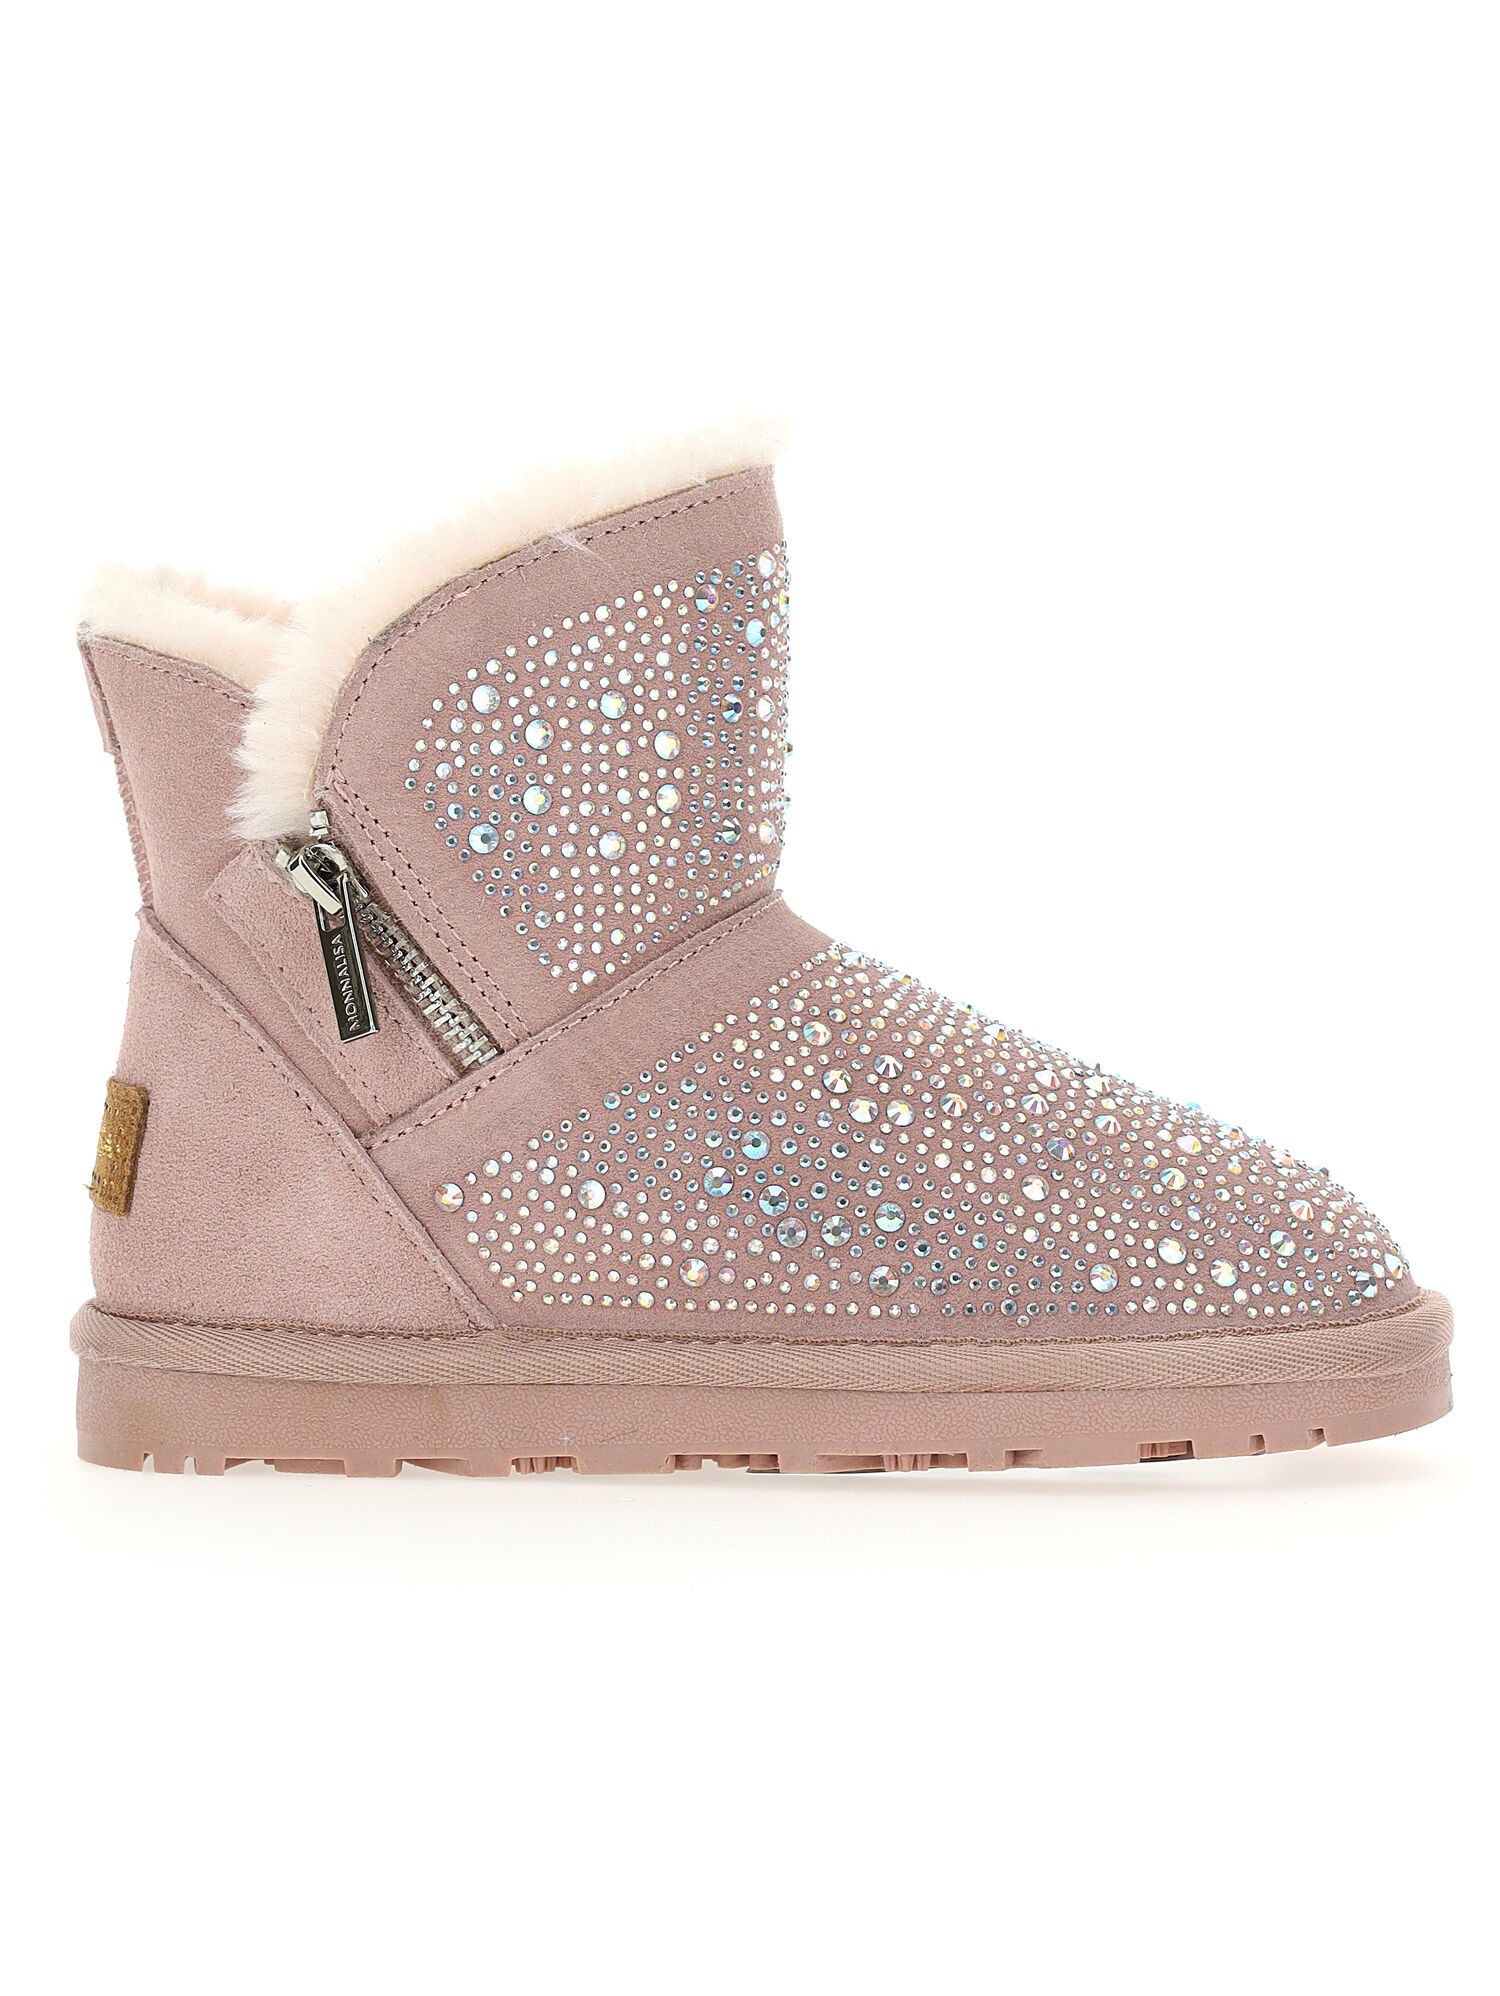 Crusted leather ankle boots with rhinestones Monnalisa Girls Shoes Boots Ankle Boots 